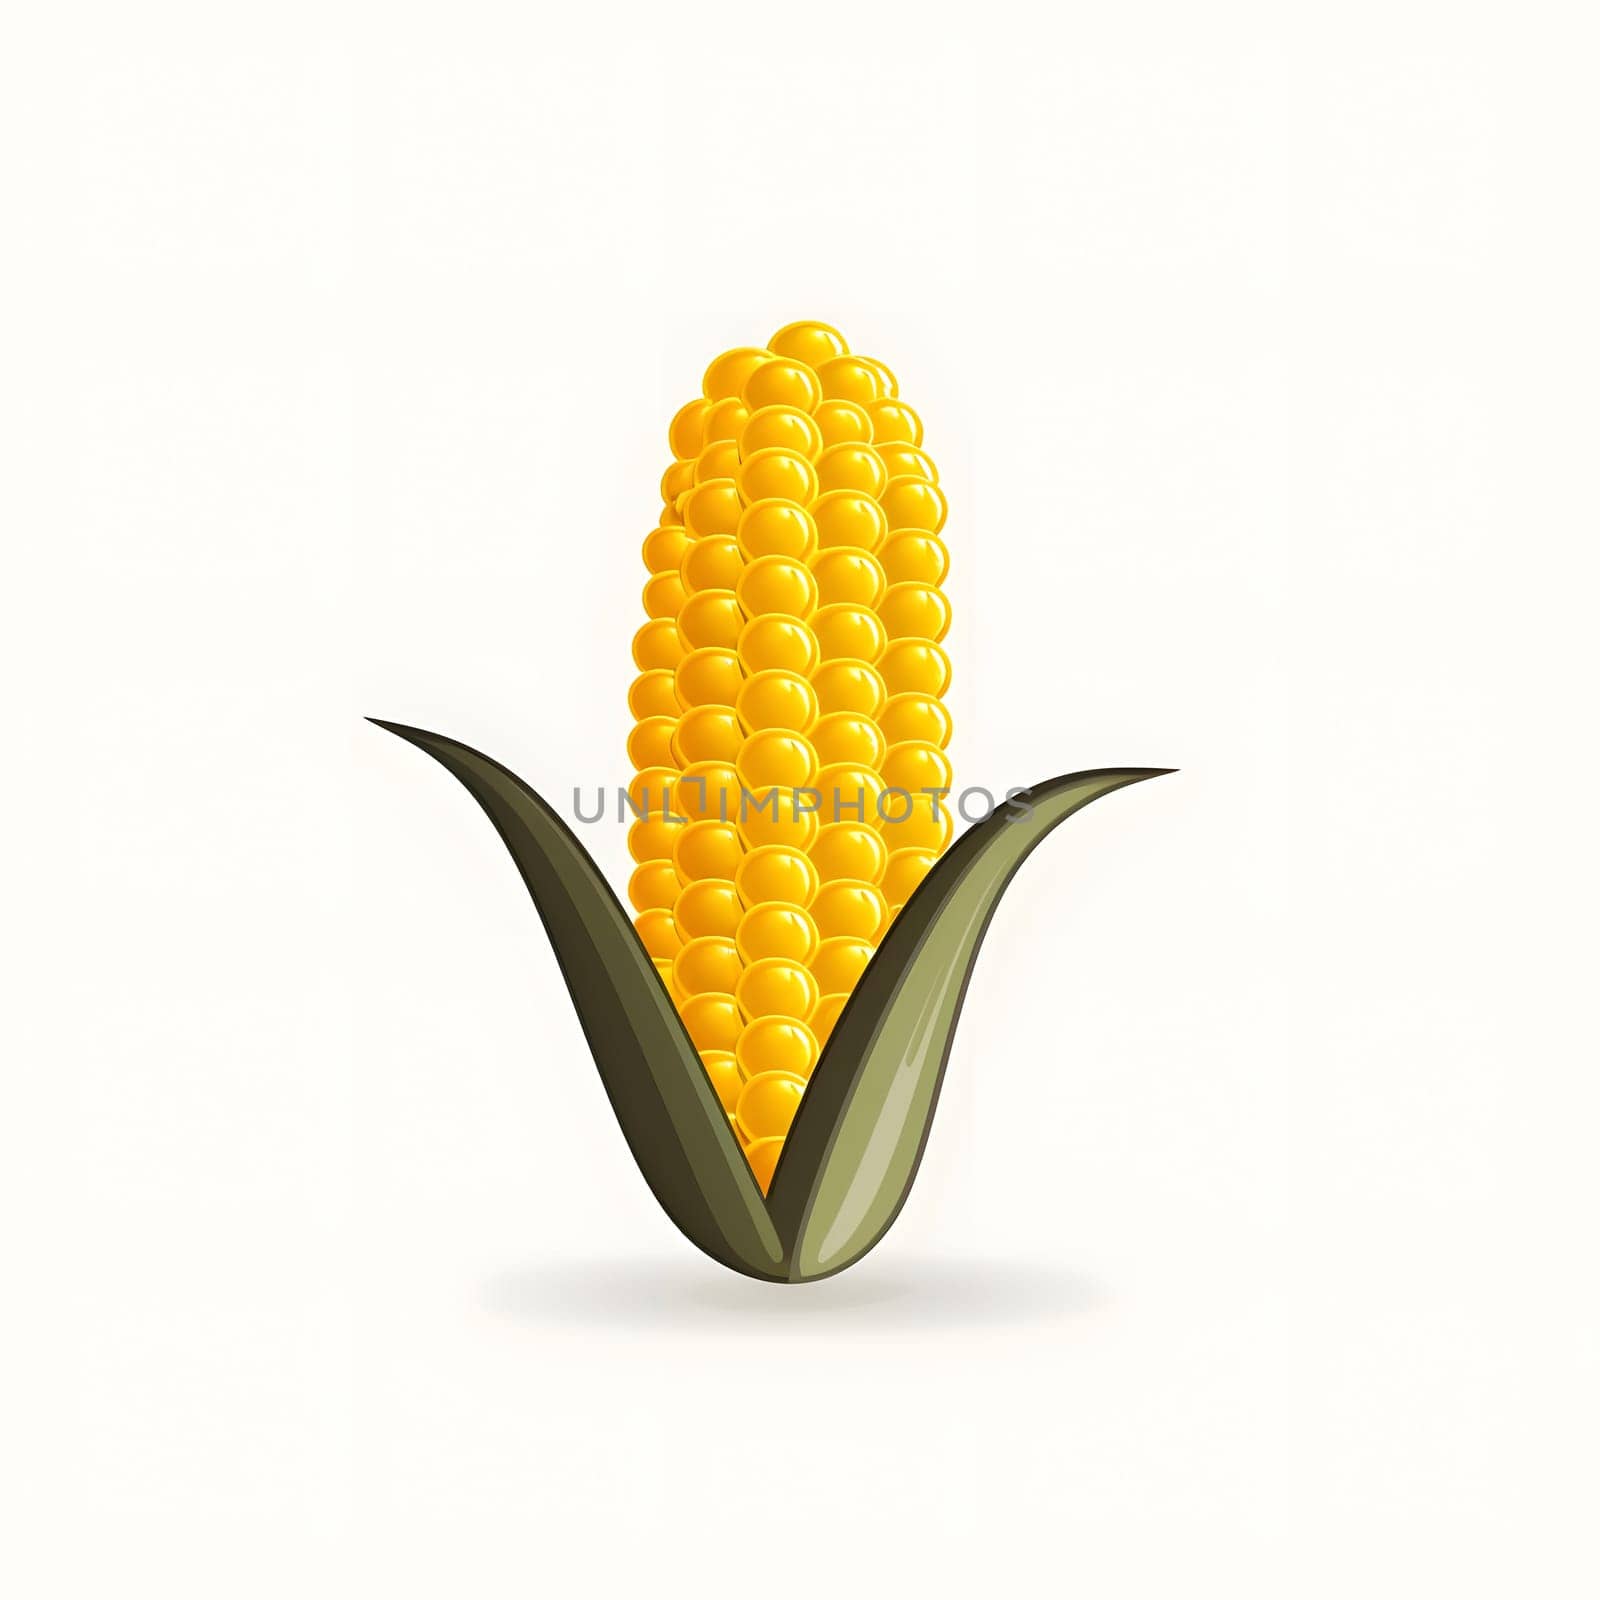 Yellow corn cob with two green leaves logo. Corn as a dish of thanksgiving for the harvest, picture on a white isolated background. An atmosphere of joy and celebration.